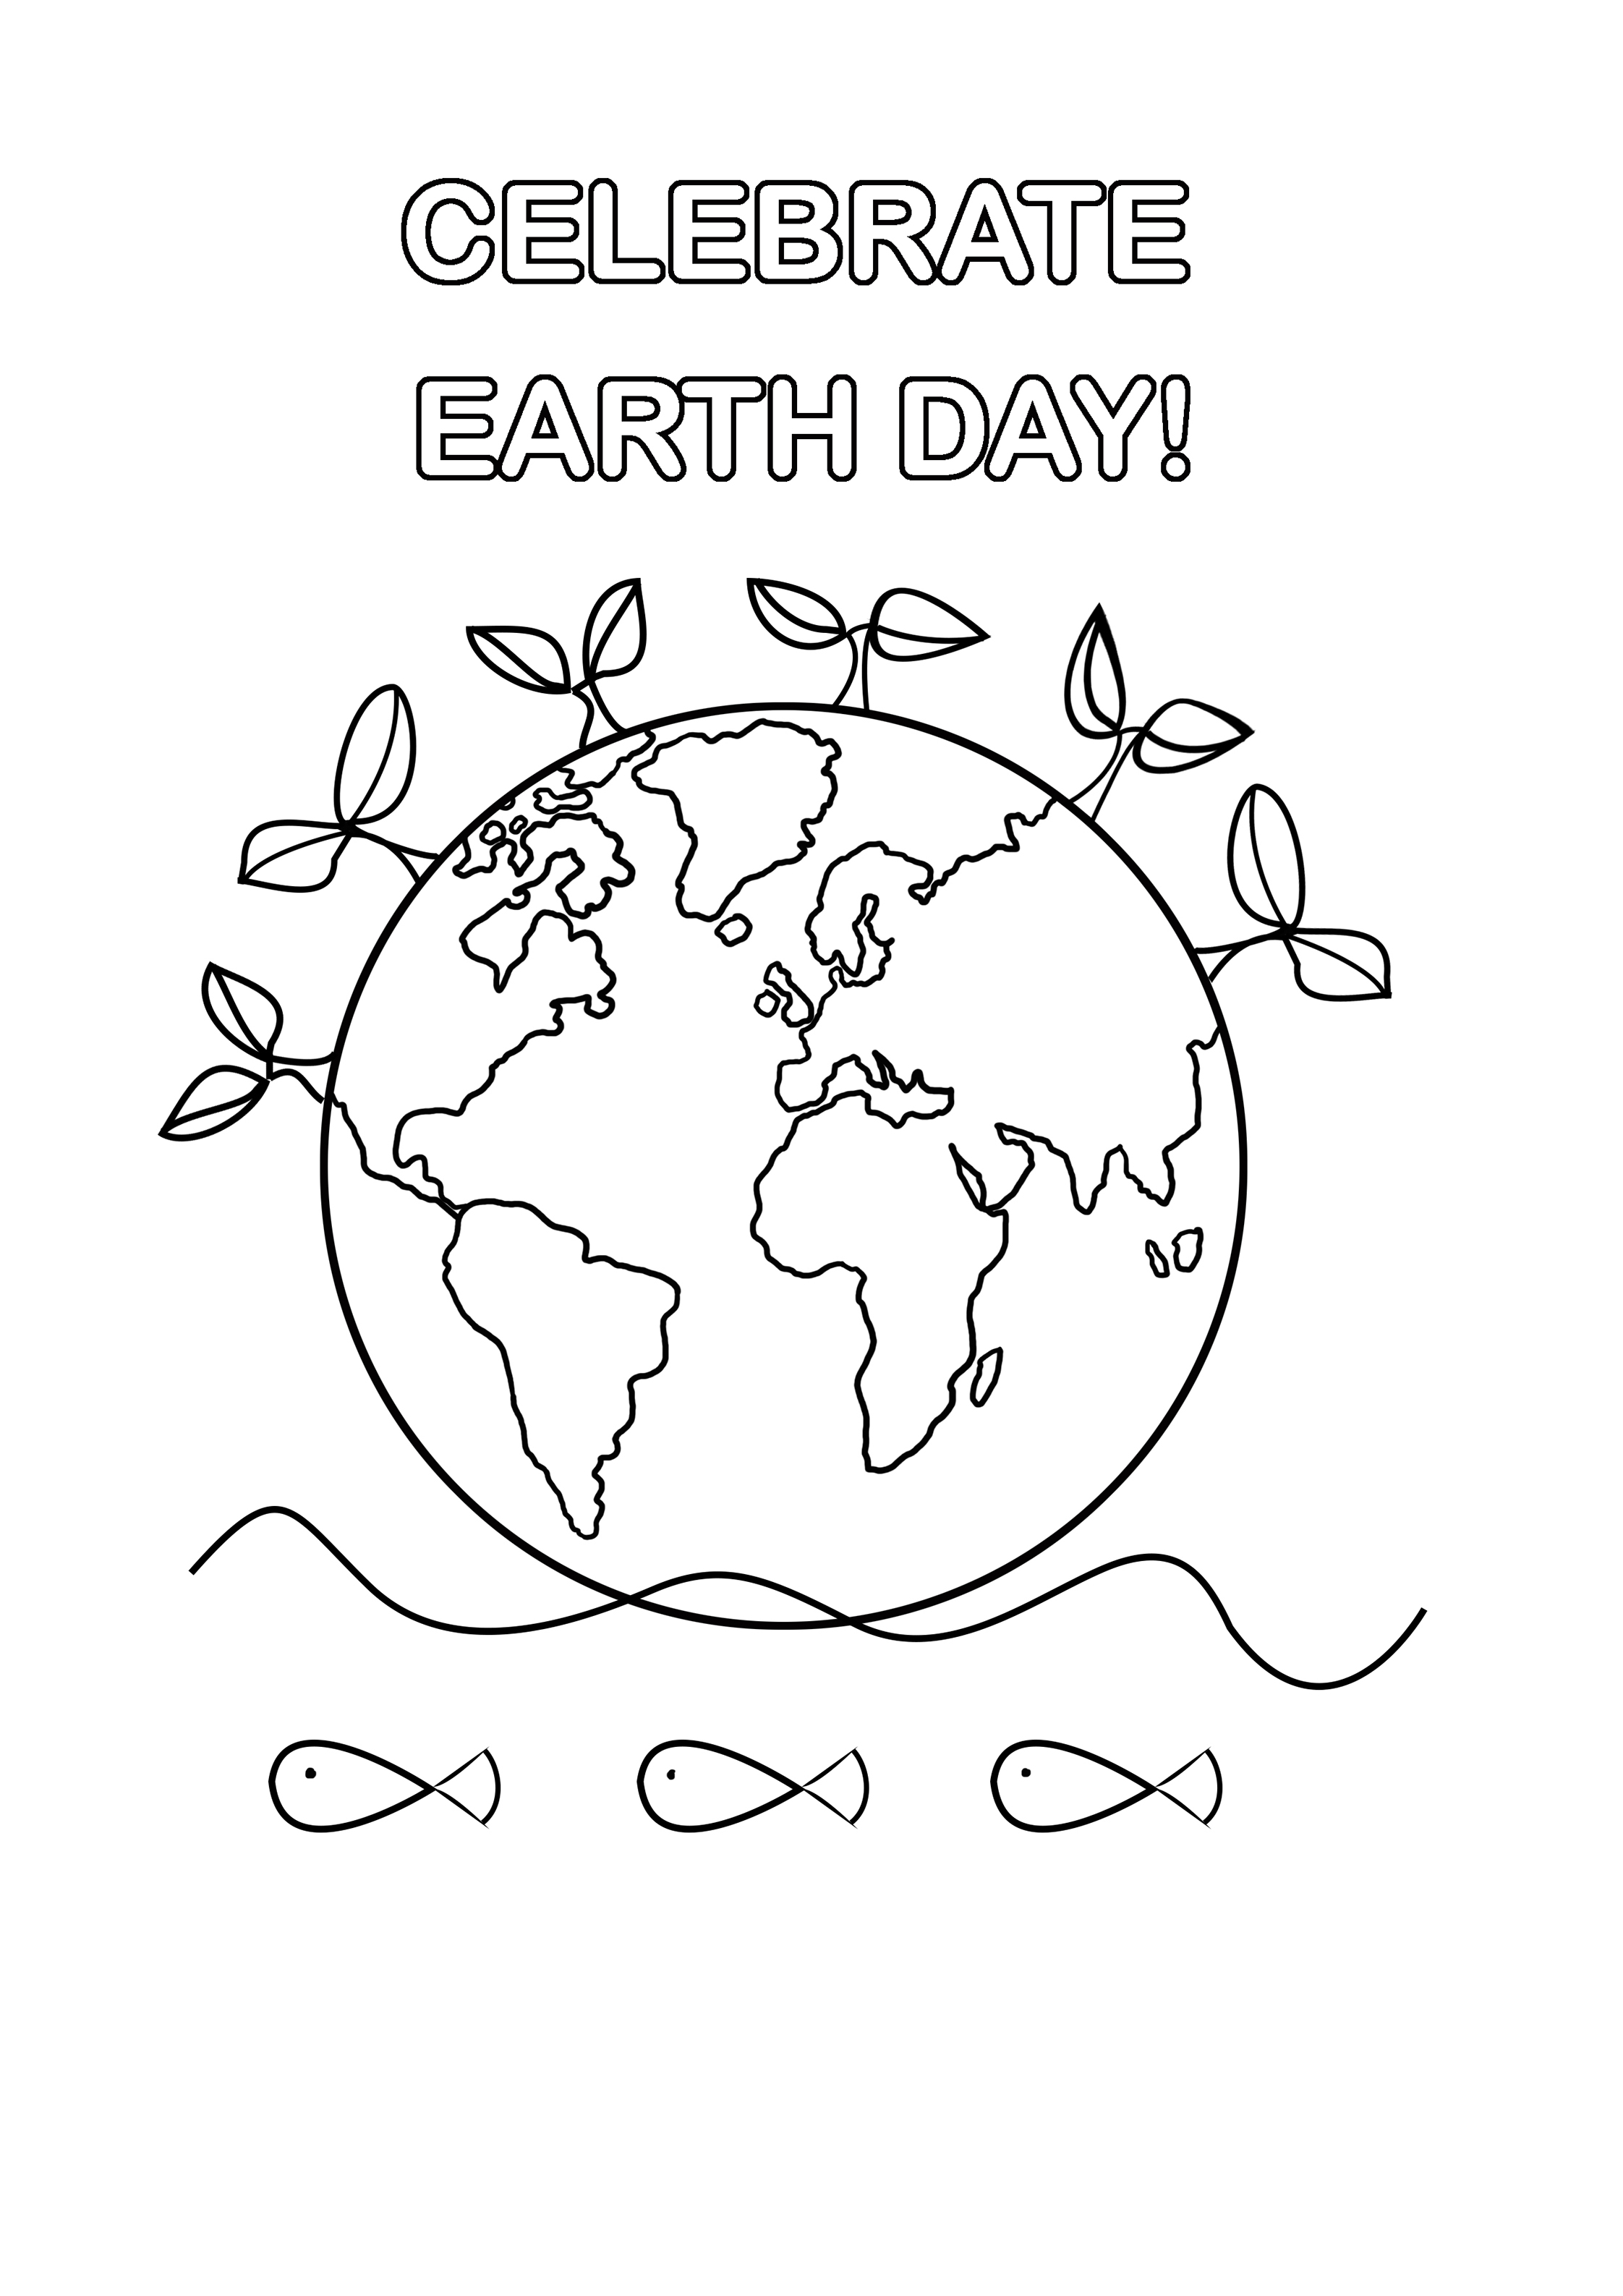 Earth Day Coloring Pages 21 printable earth day coloring pages | Random ...